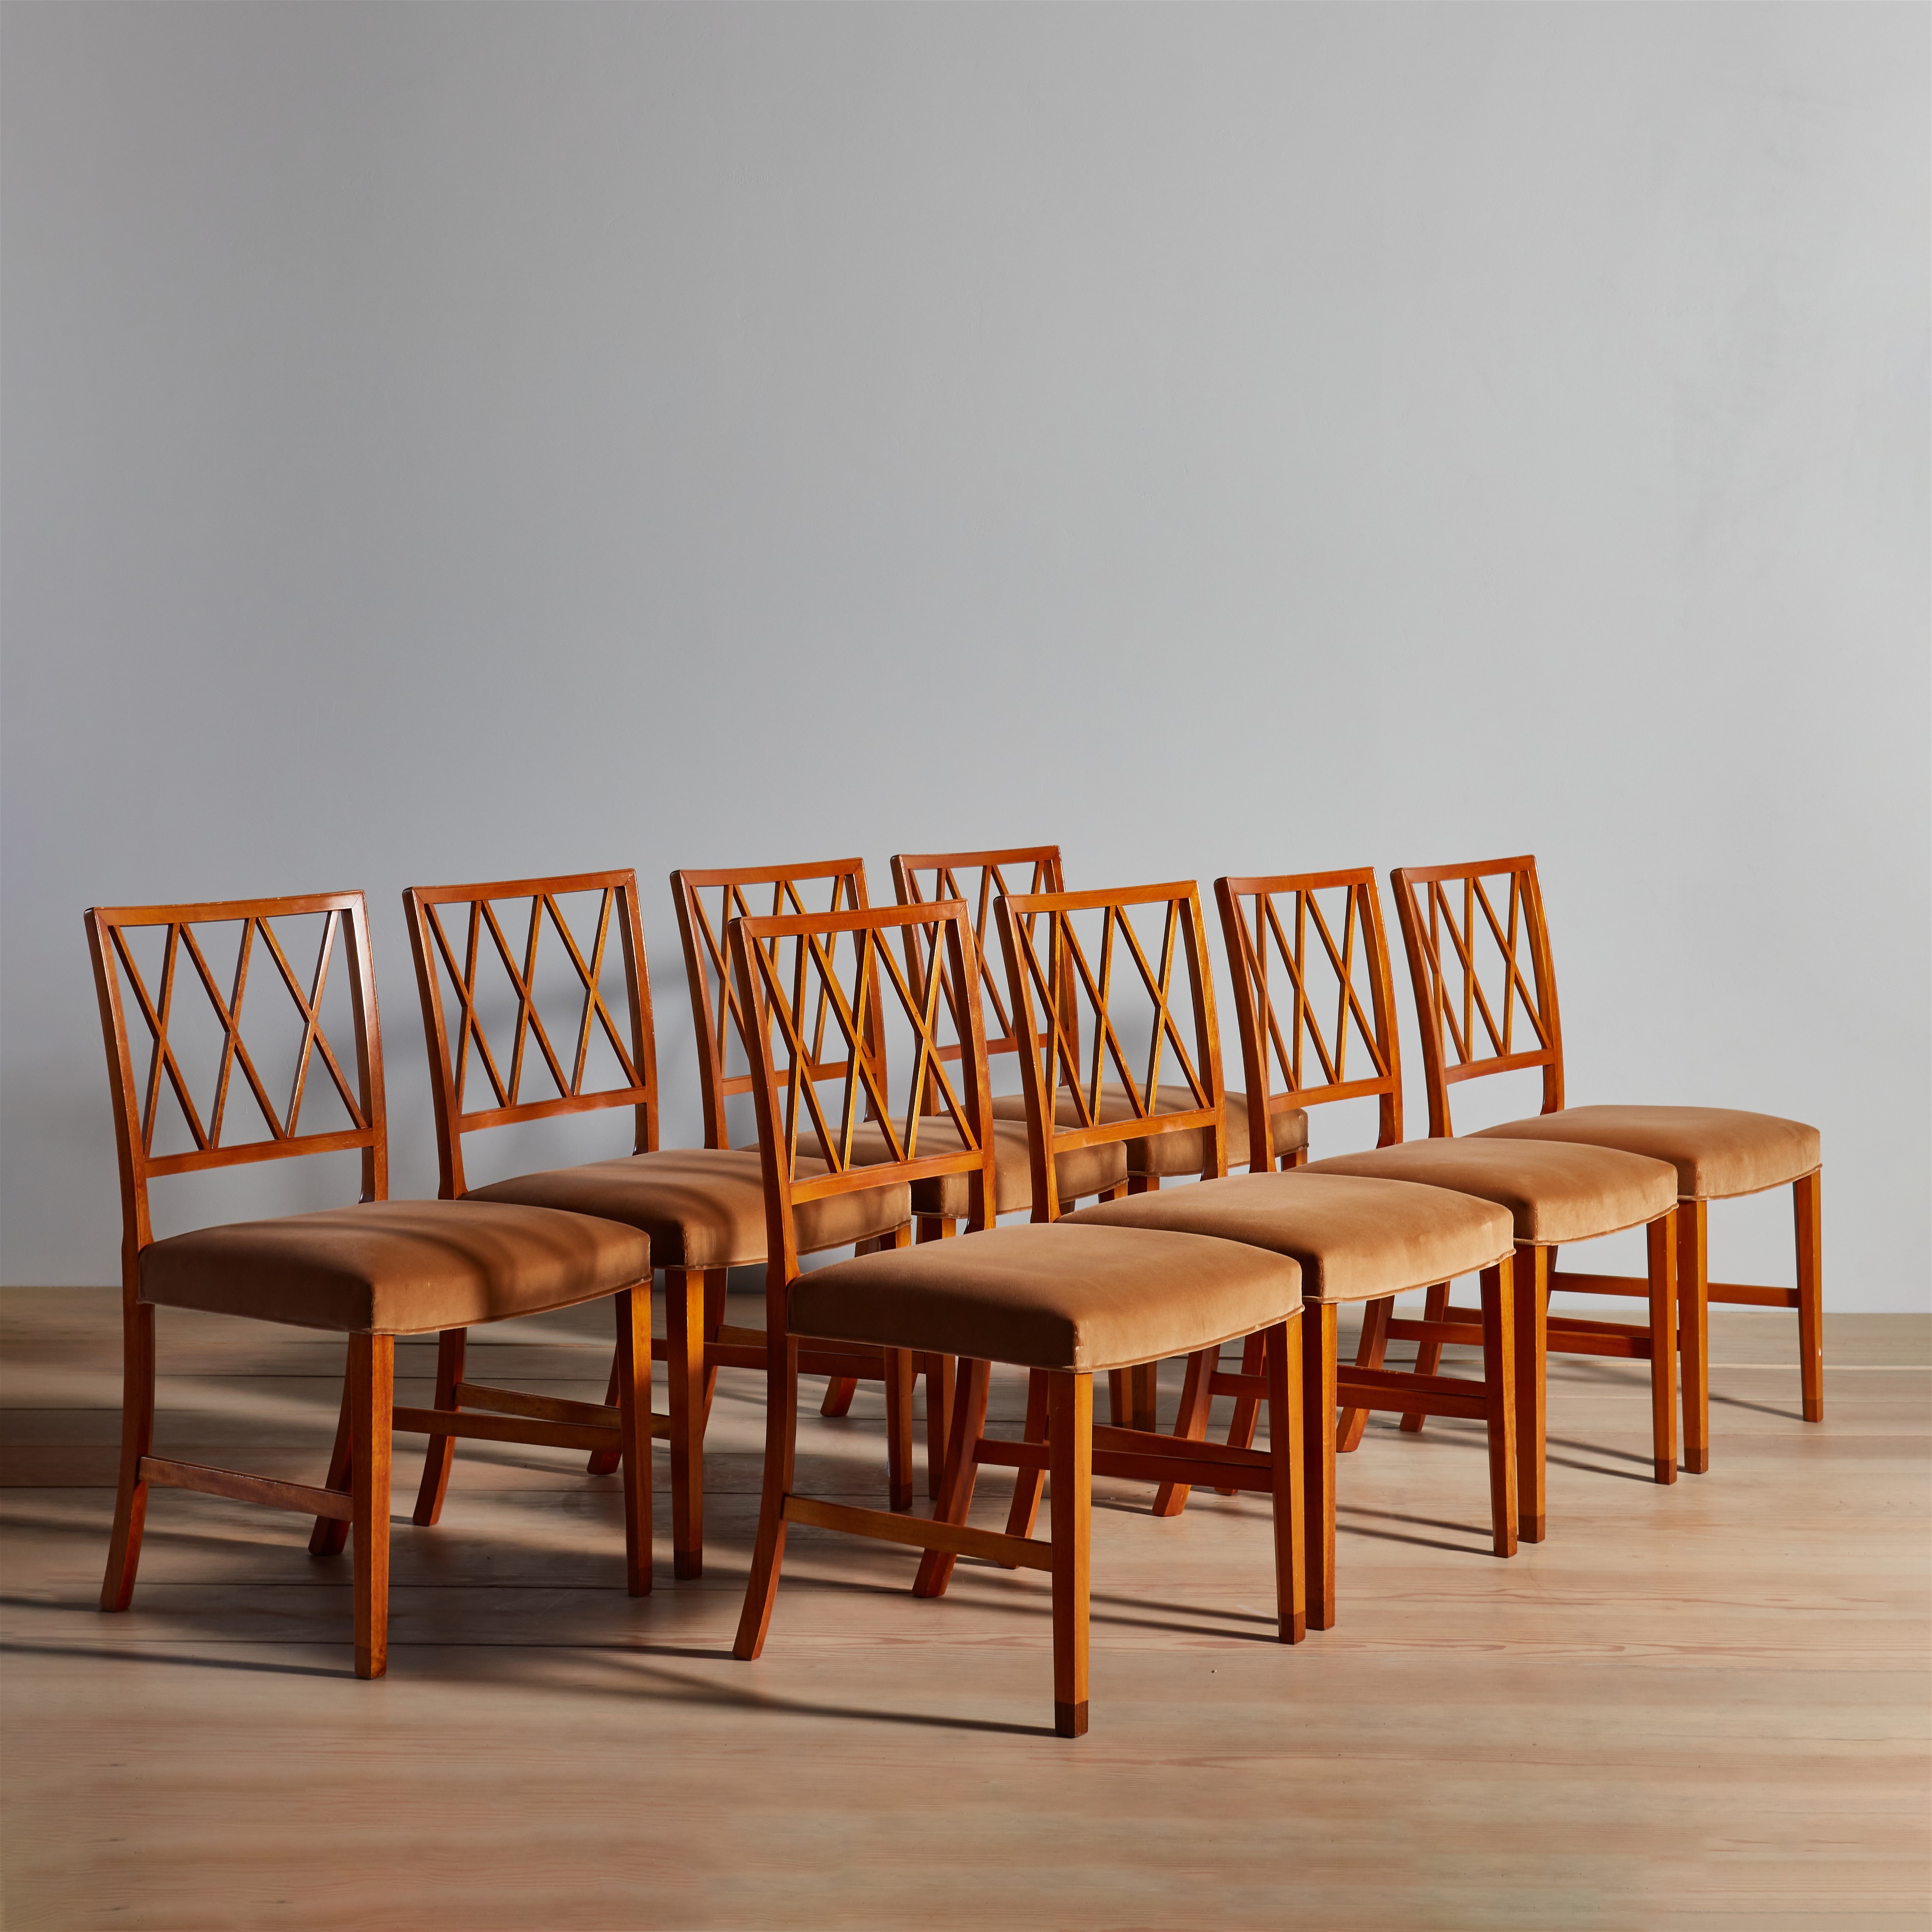 a set of six wooden chairs sitting on top of a wooden floor